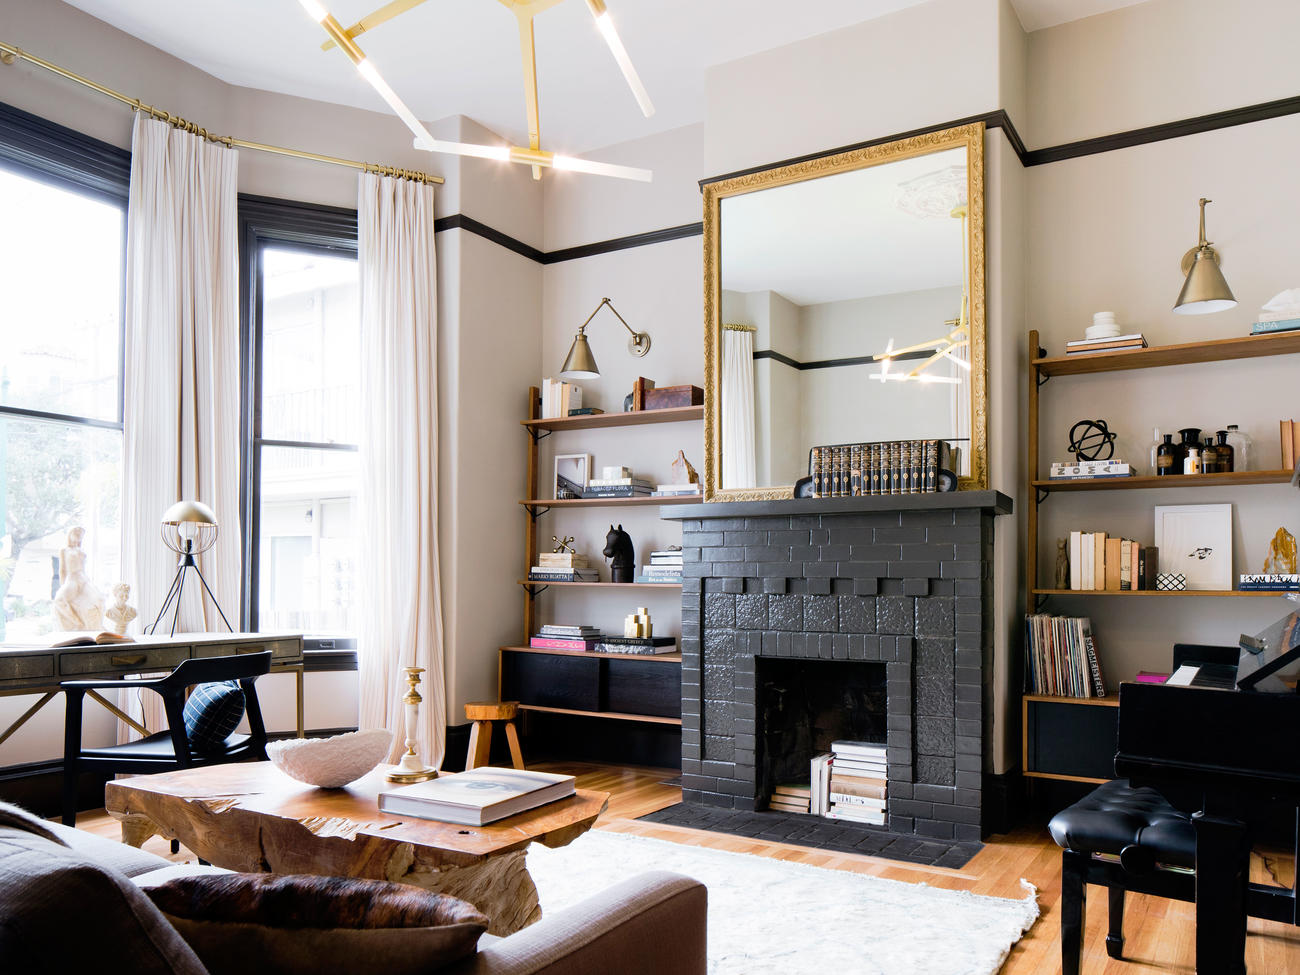 Sunset Editor-in-Chief’s Inspiring Victorian Makeover